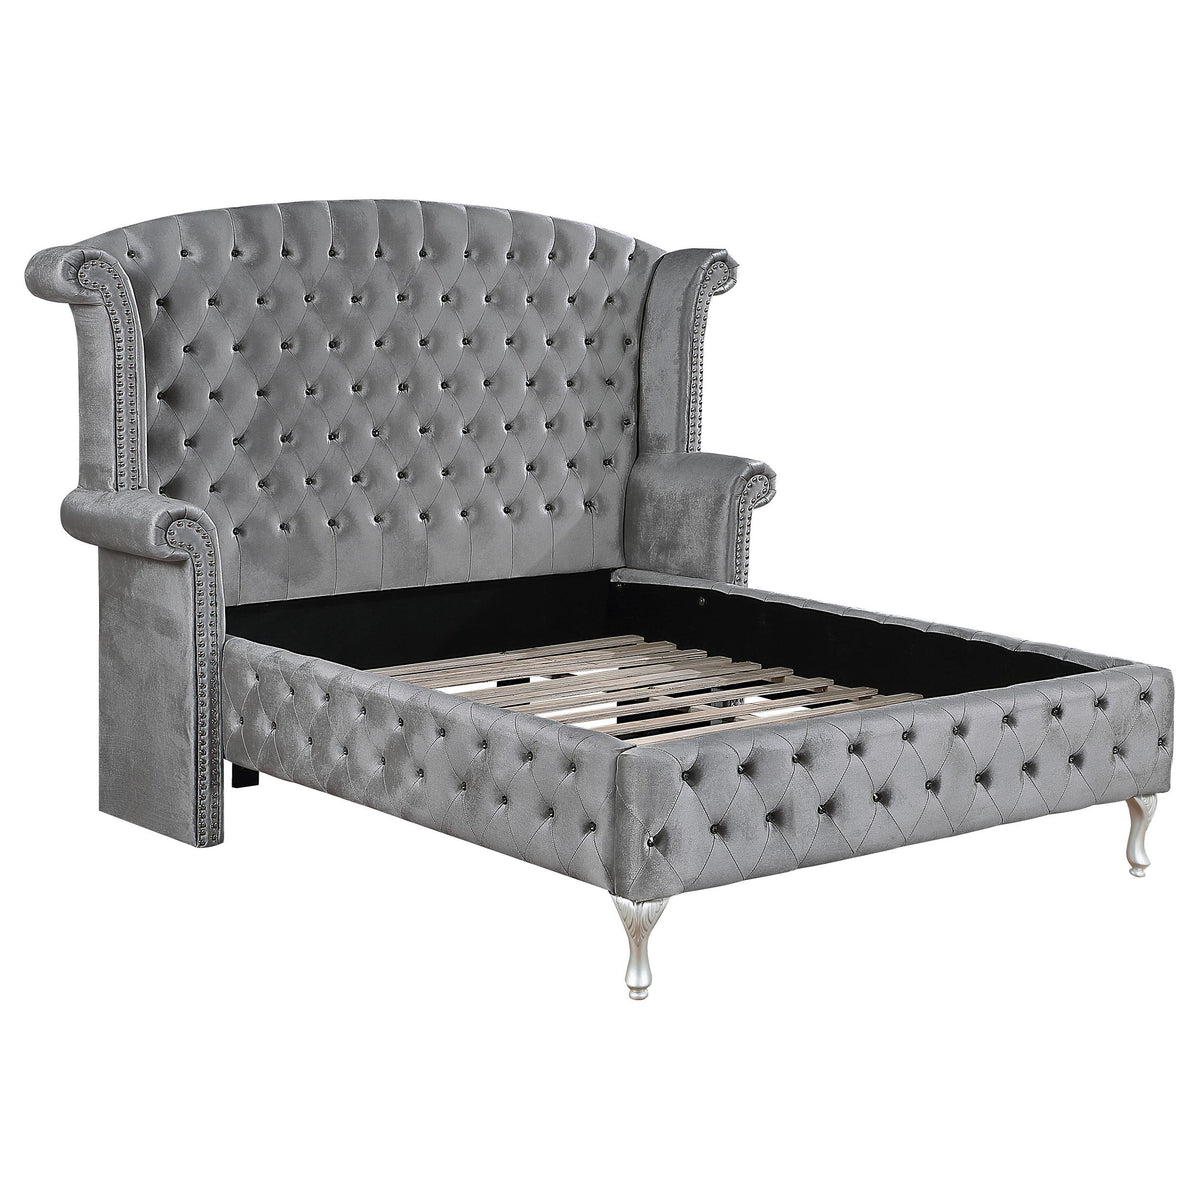 Deanna California King Tufted Upholstered Bed Grey  Las Vegas Furniture Stores